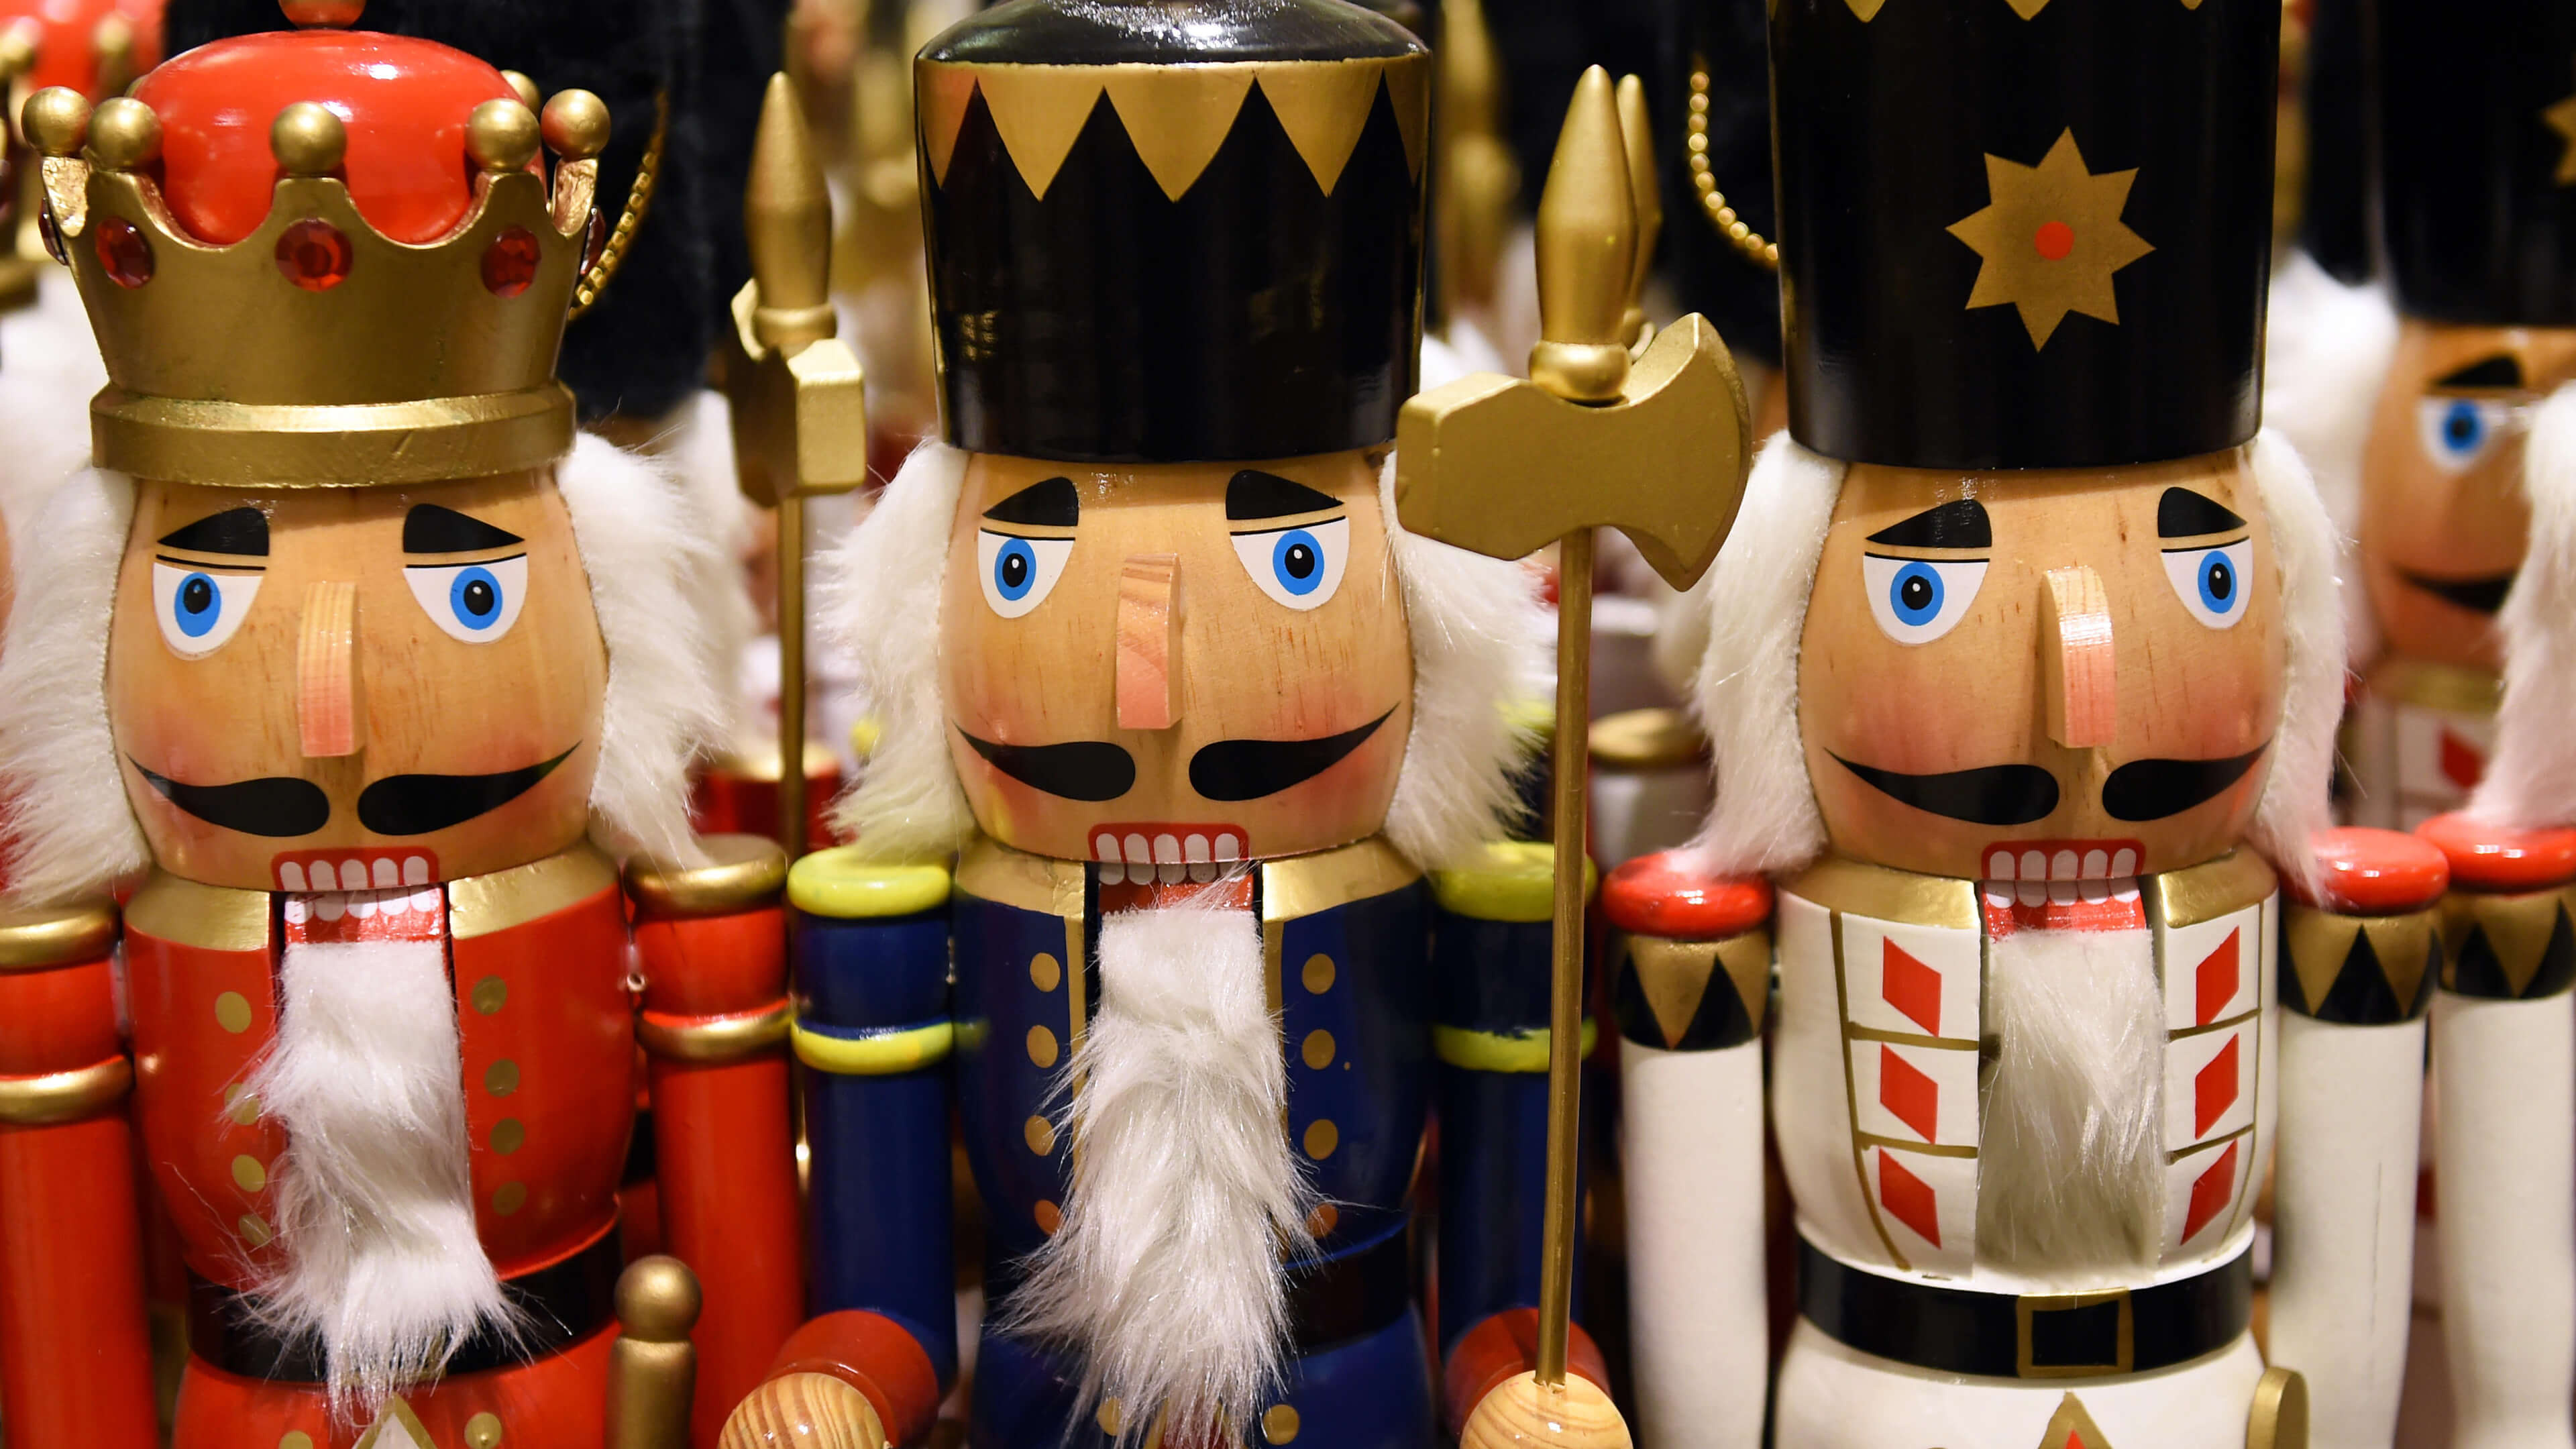 Nutcracker: Christmas nutcrackers, Decorative figurines most commonly made to resemble a toy soldier. 3840x2160 4K Background.